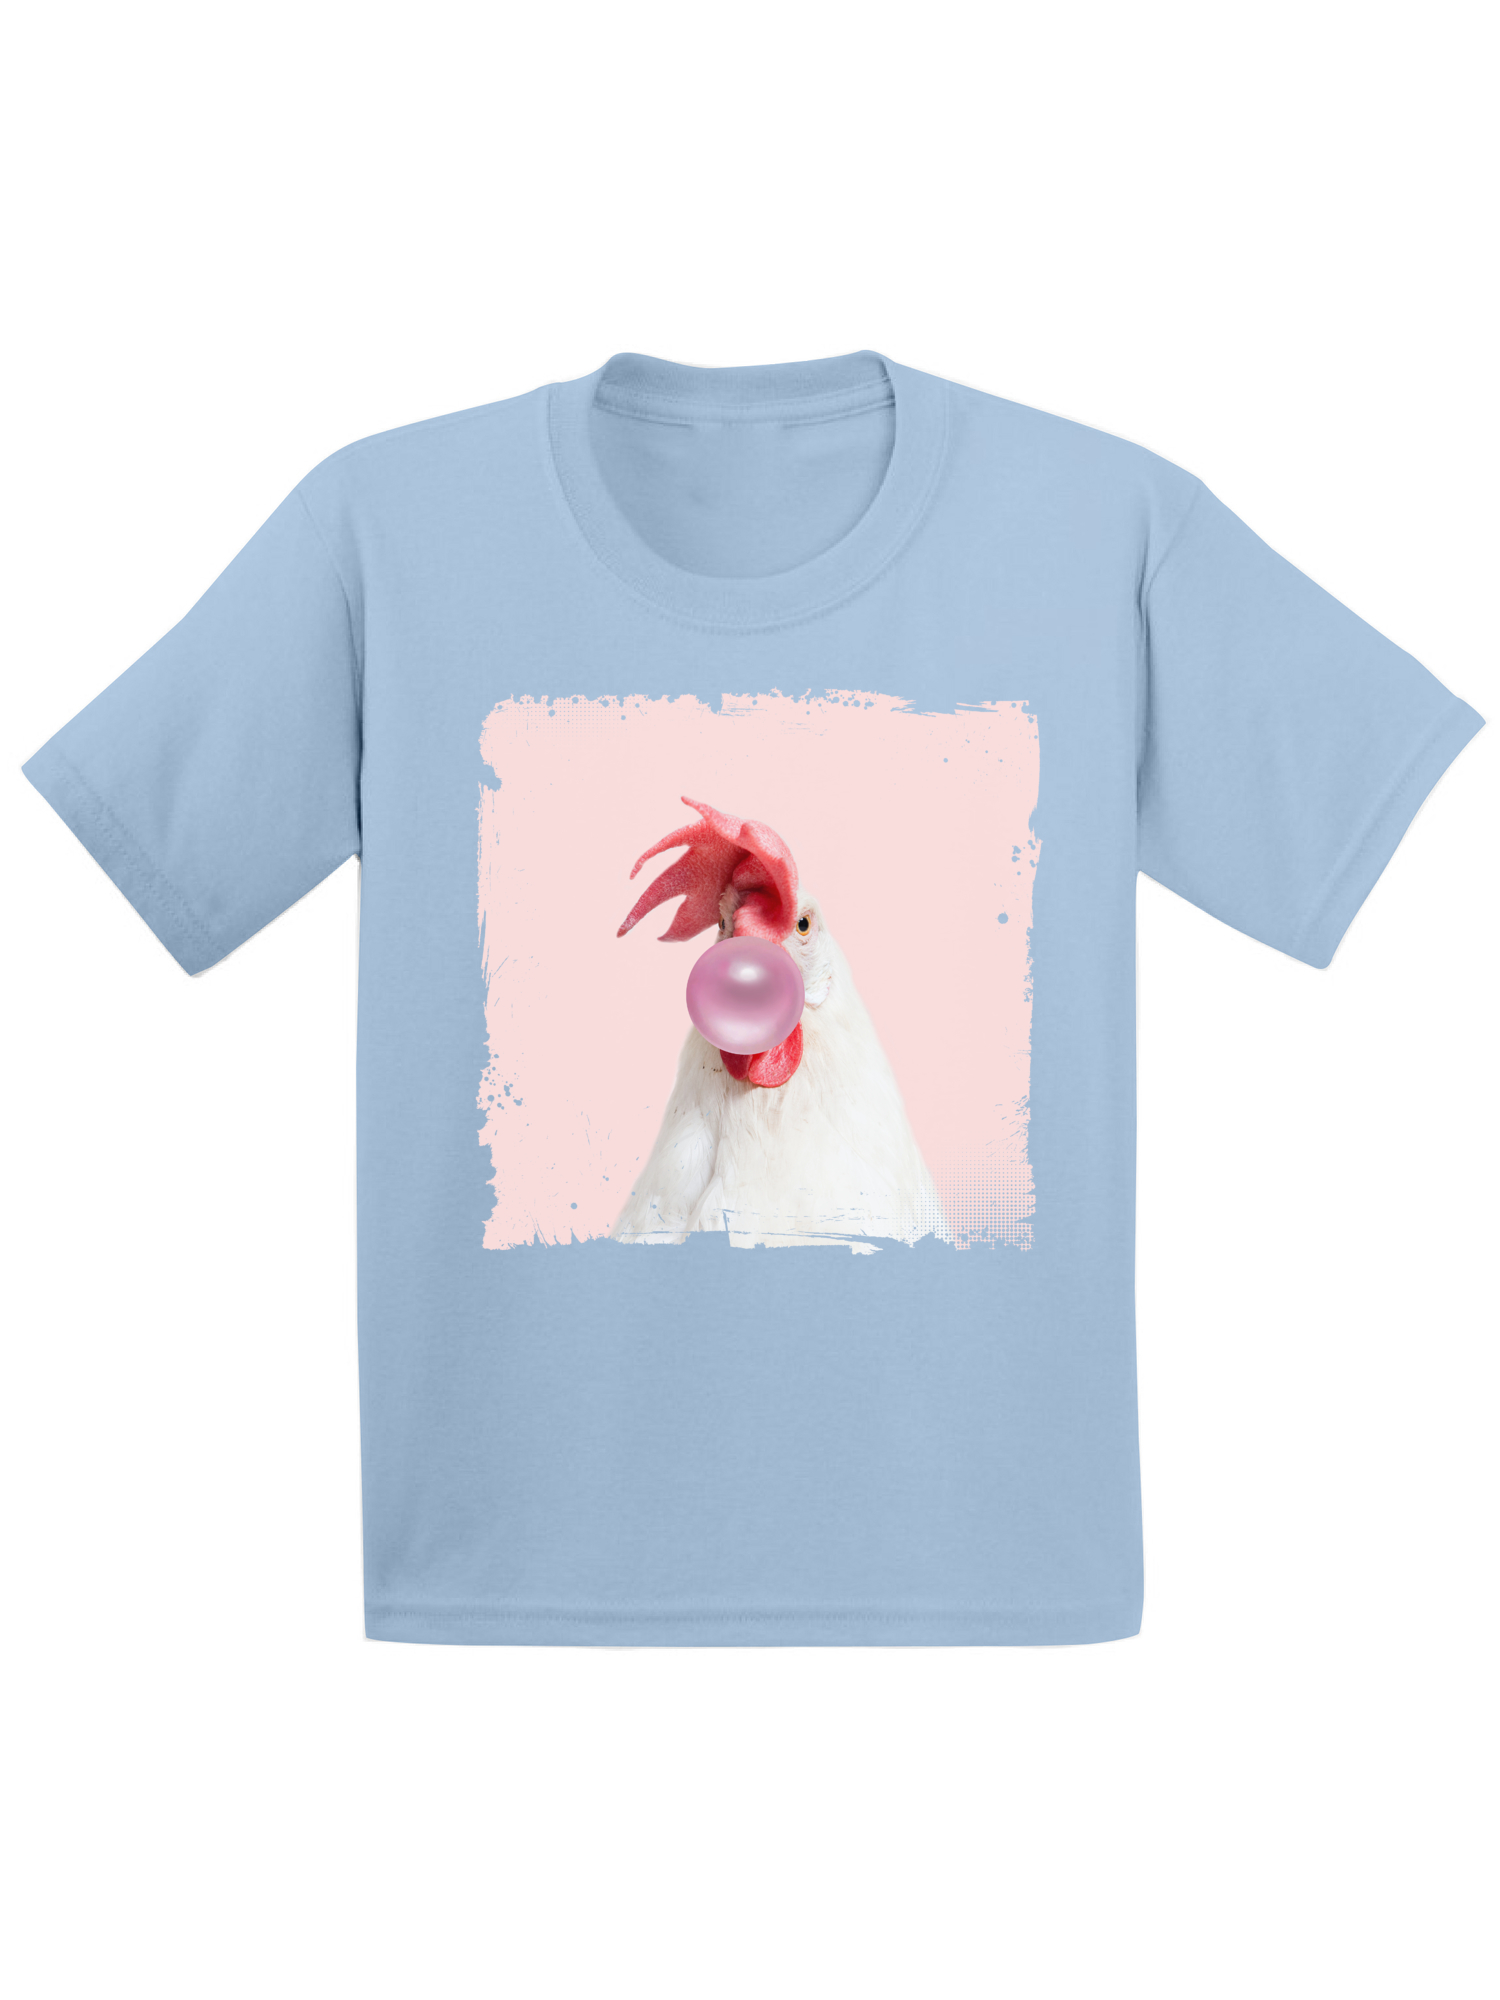 Awkward Styles Pink Bubble Shirt Cute Infant Shirt Rooster Shirt Animals Prints Kids T Shirt Rooster Infant Tshirt Cute Gifts for Children Clothing Lovely Shirt Rooster Lovers Funny Gifts for Kids - image 1 of 4